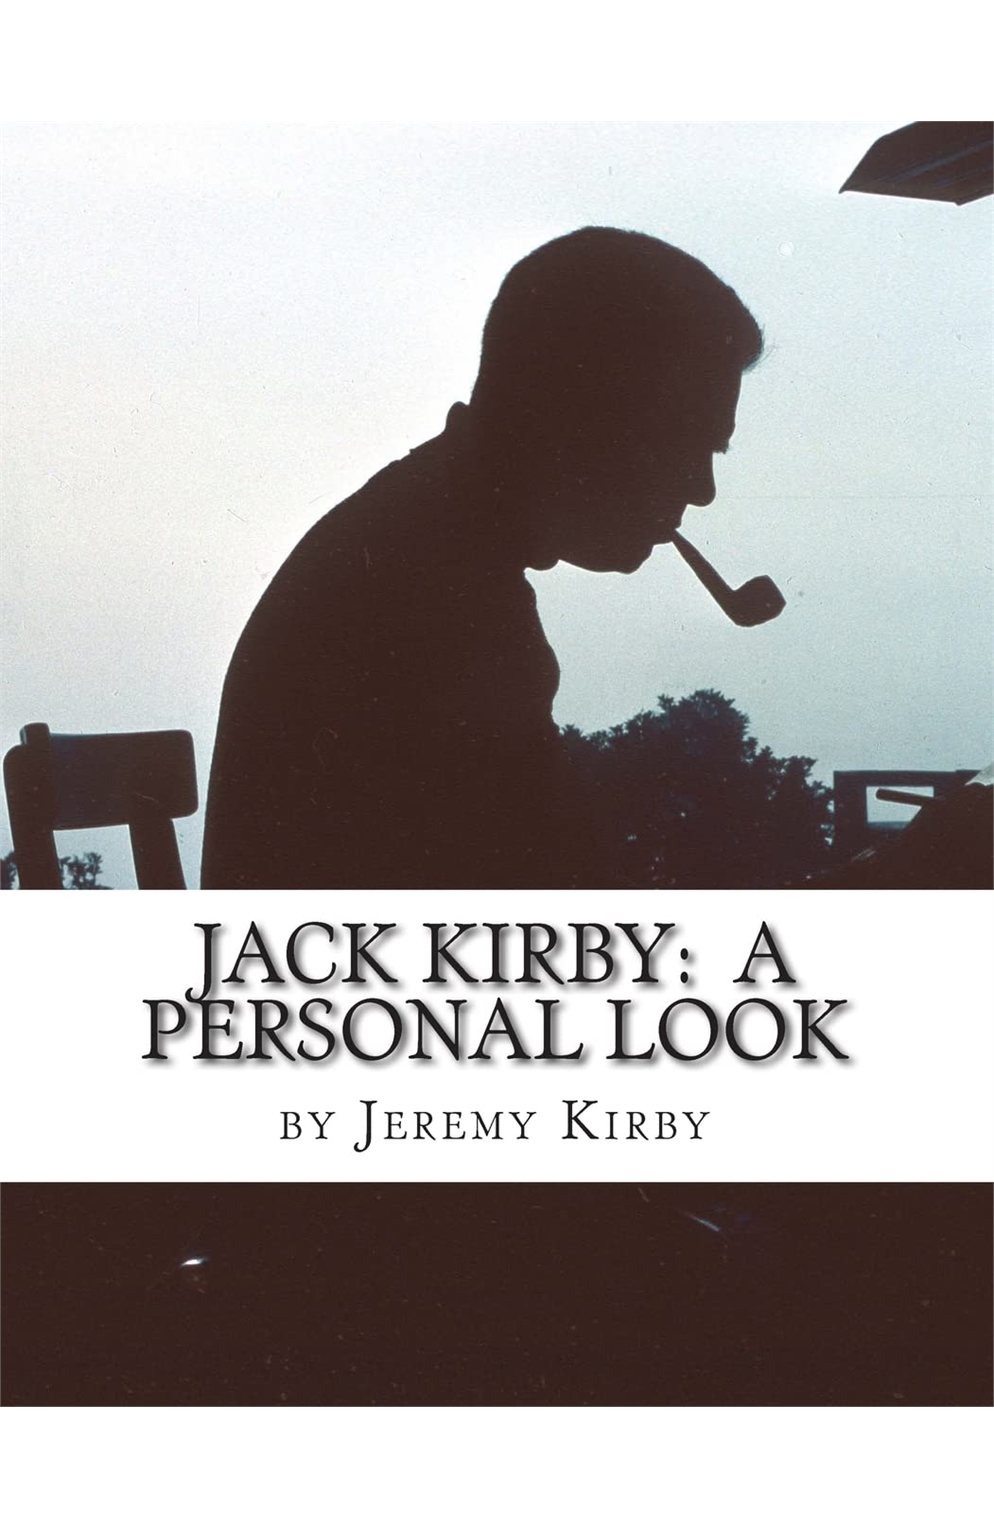 Jack Kirby: A Personal Look